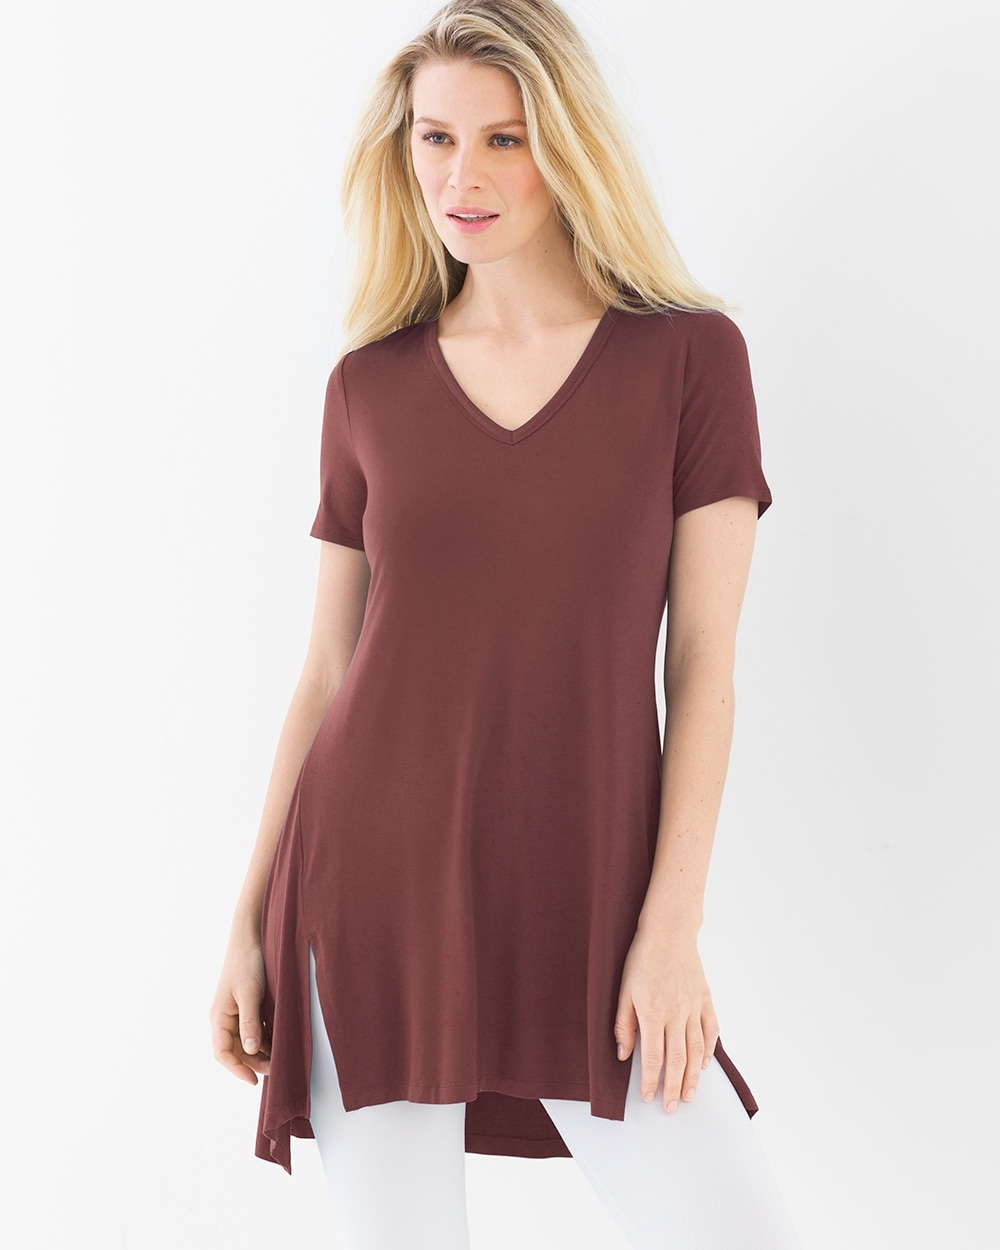 Style Essentials Soft Jersey Short Sleeve Tunic Tee Ginger Root